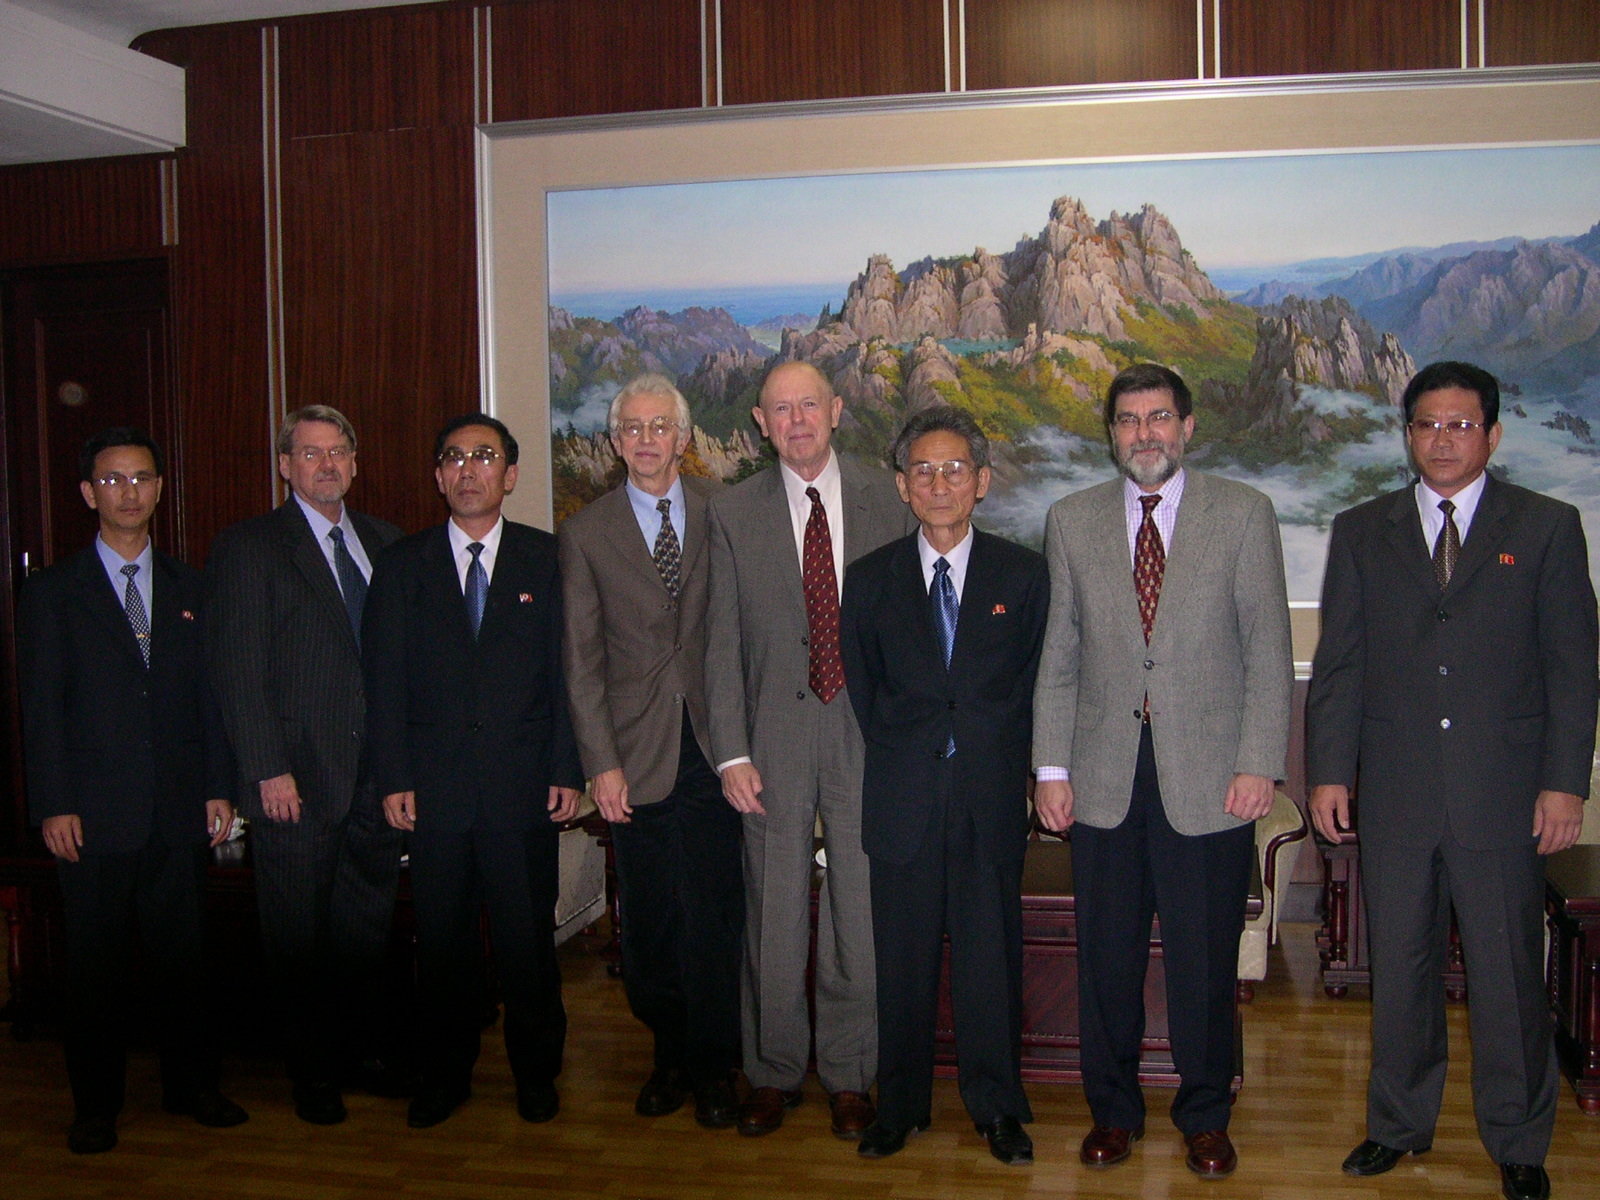 Large group of men in business suits posing in front of a wall-sized landscape painting